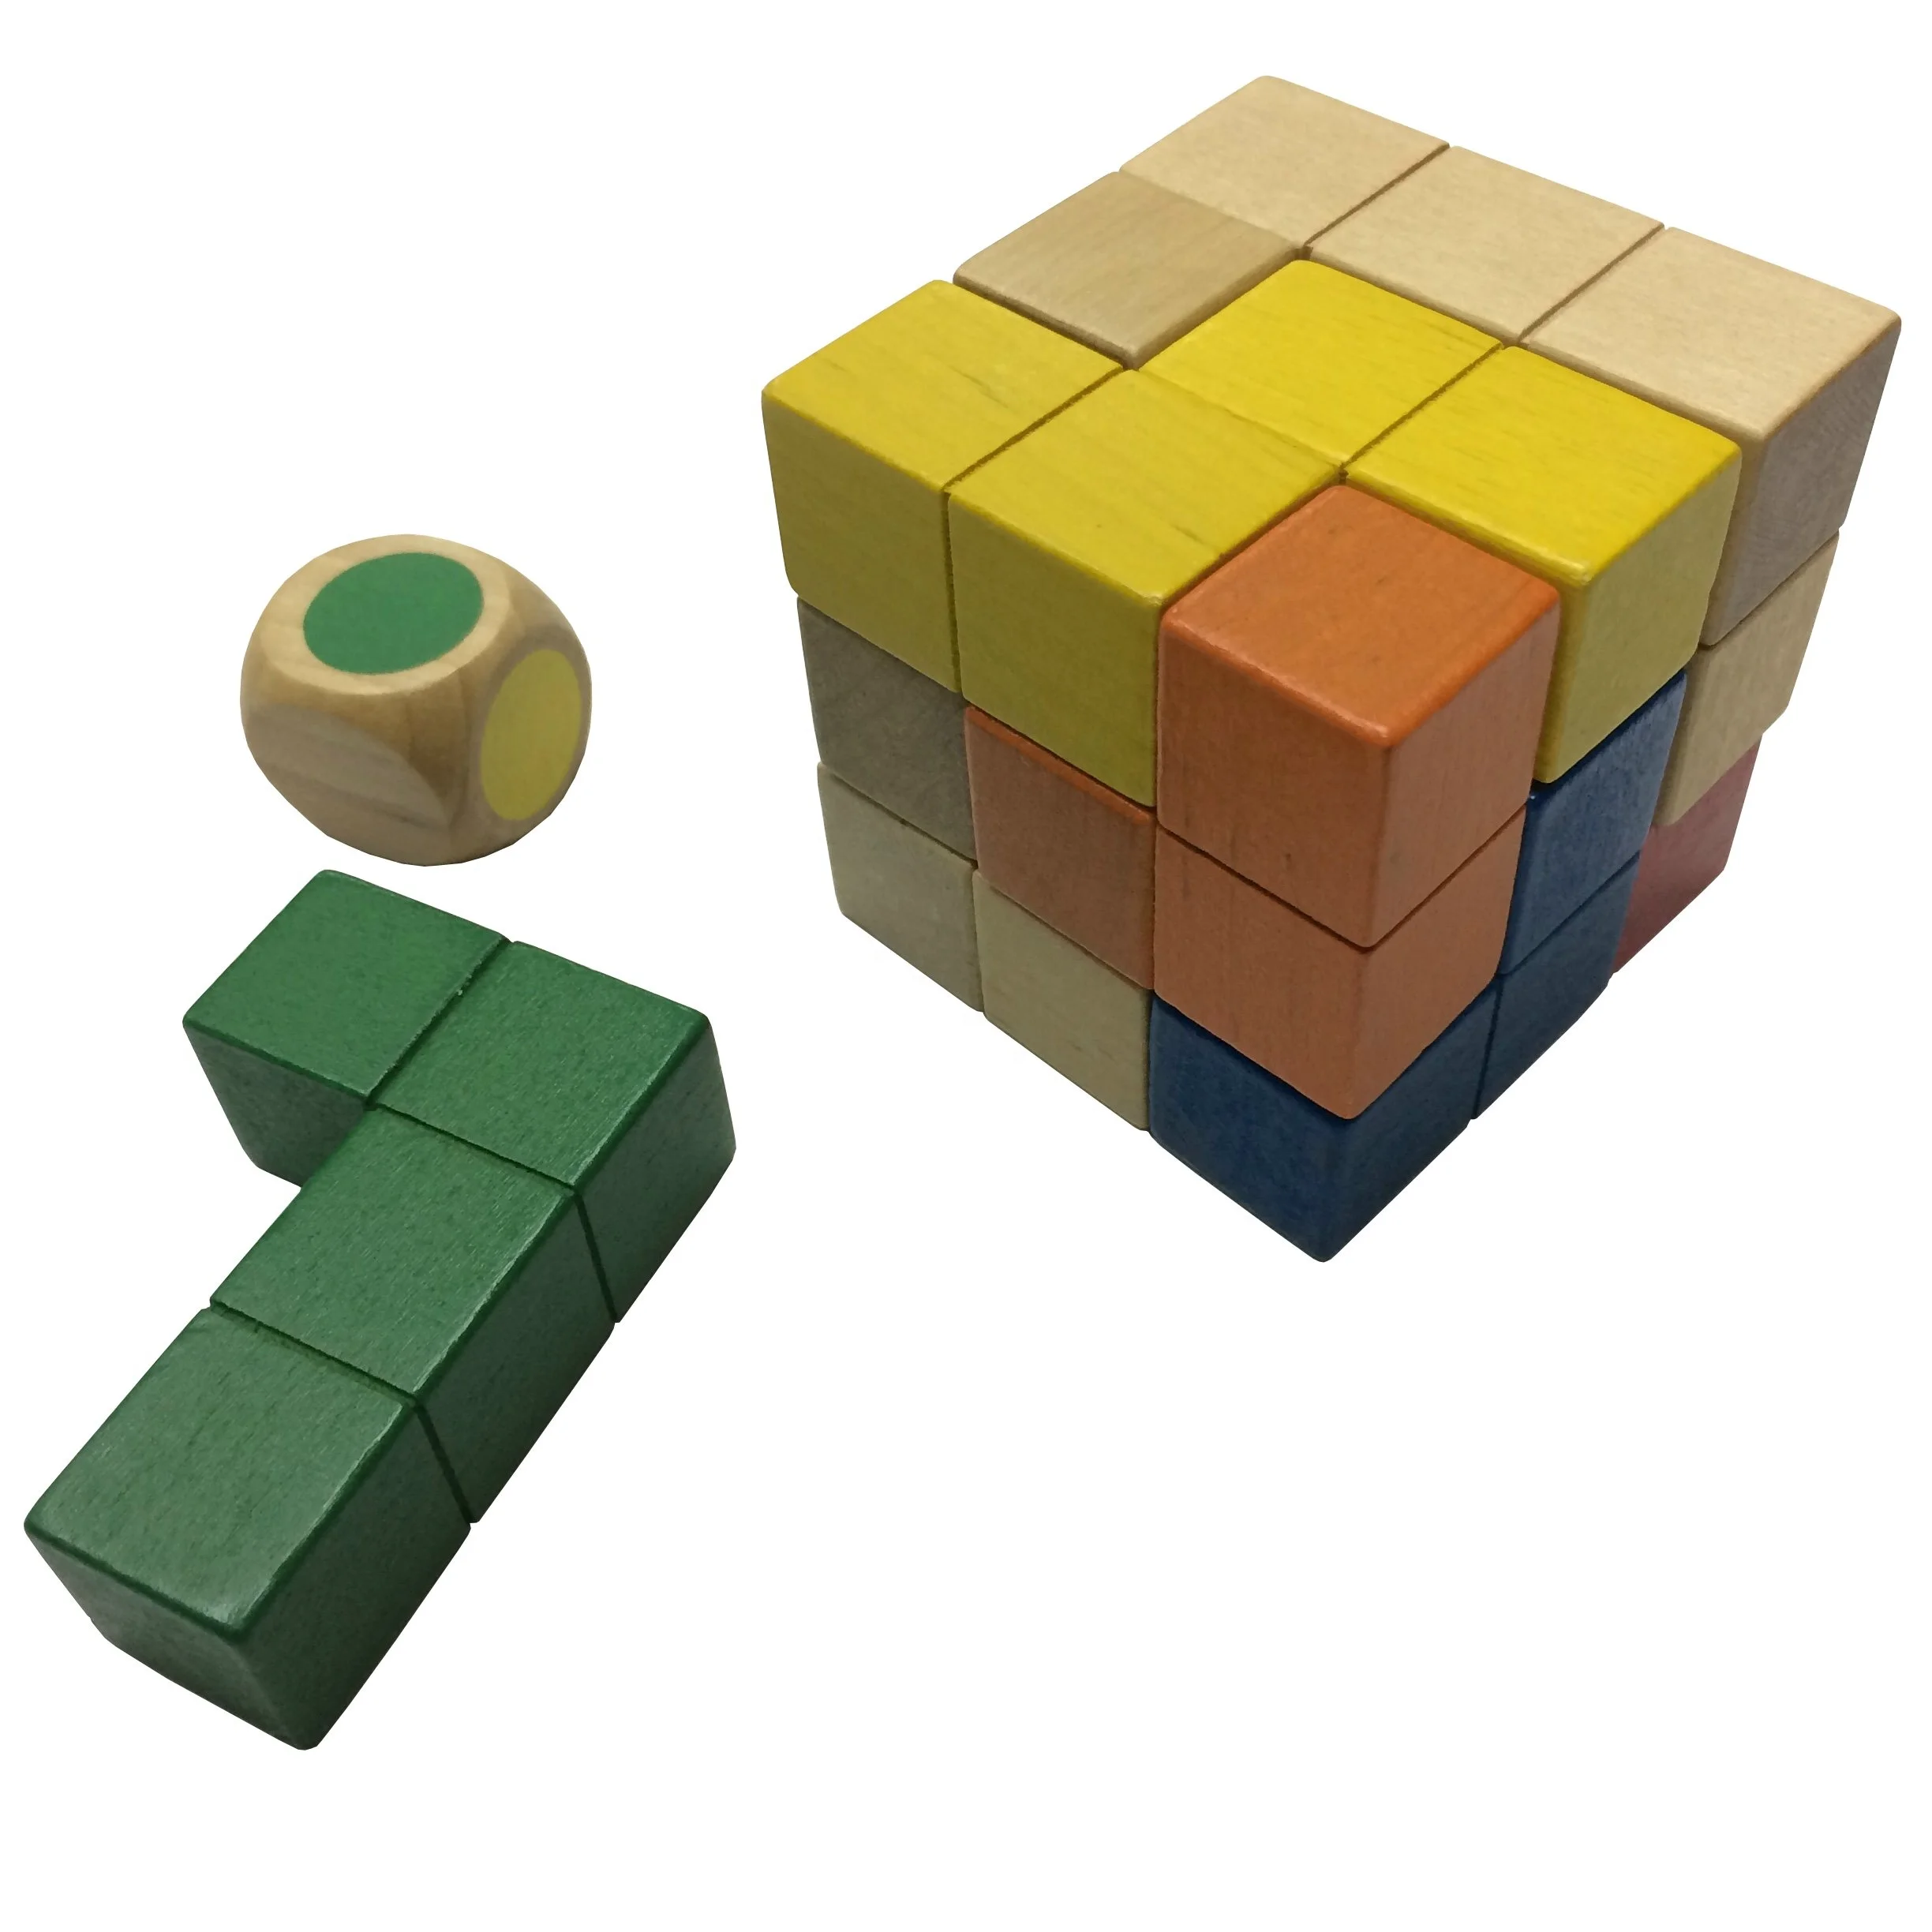 Challenging Kids Wooden Intelligence 3D Brain Teaser IQ Cube Puzzle with Dice